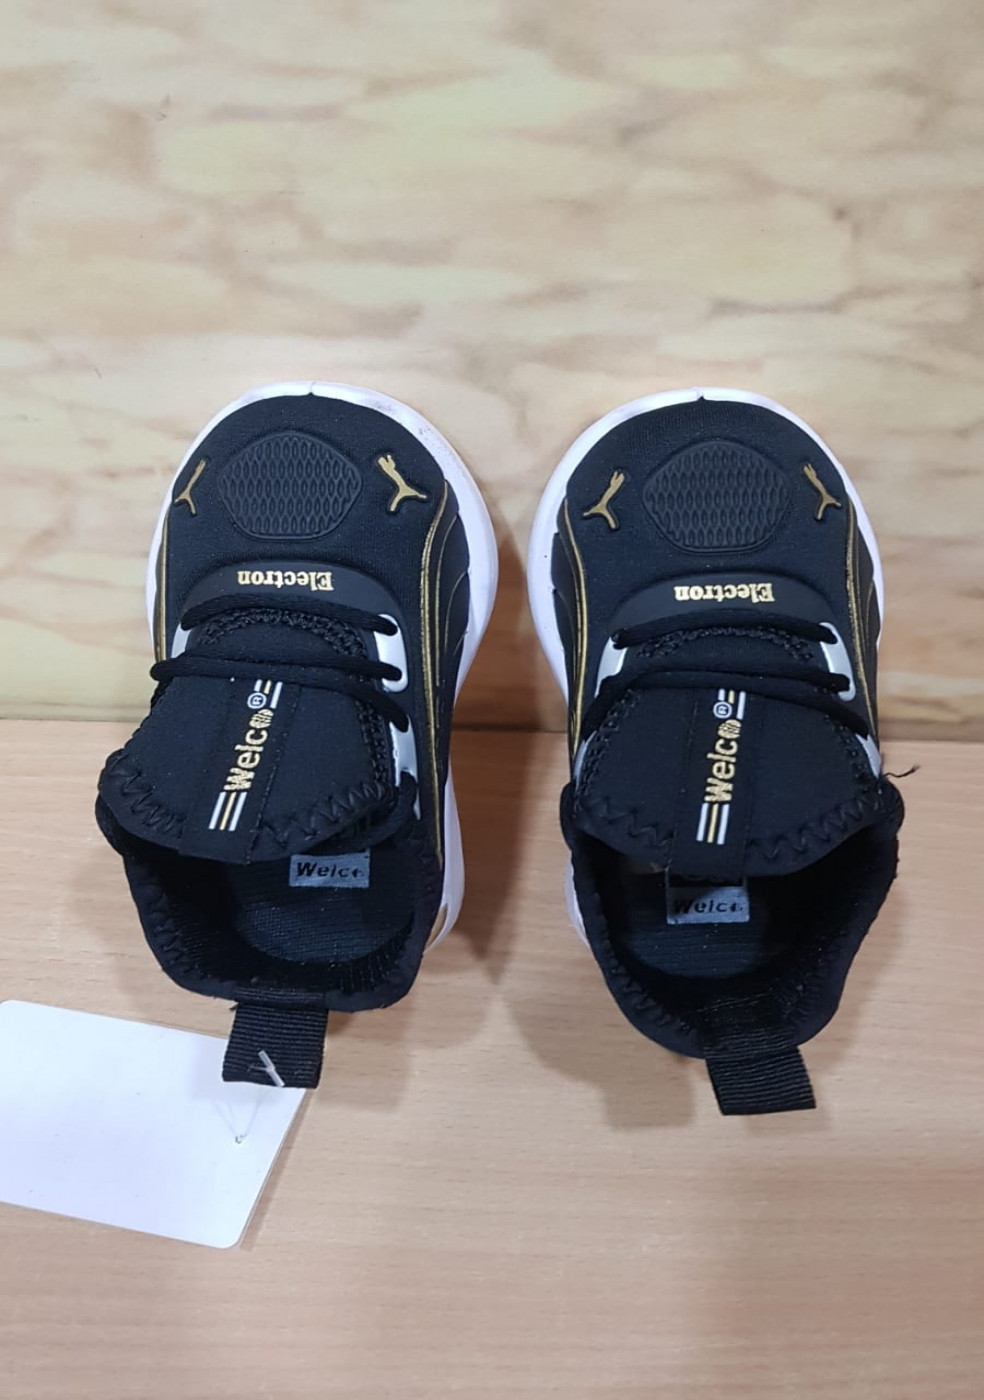 Kids Sports Black Shoes With laces